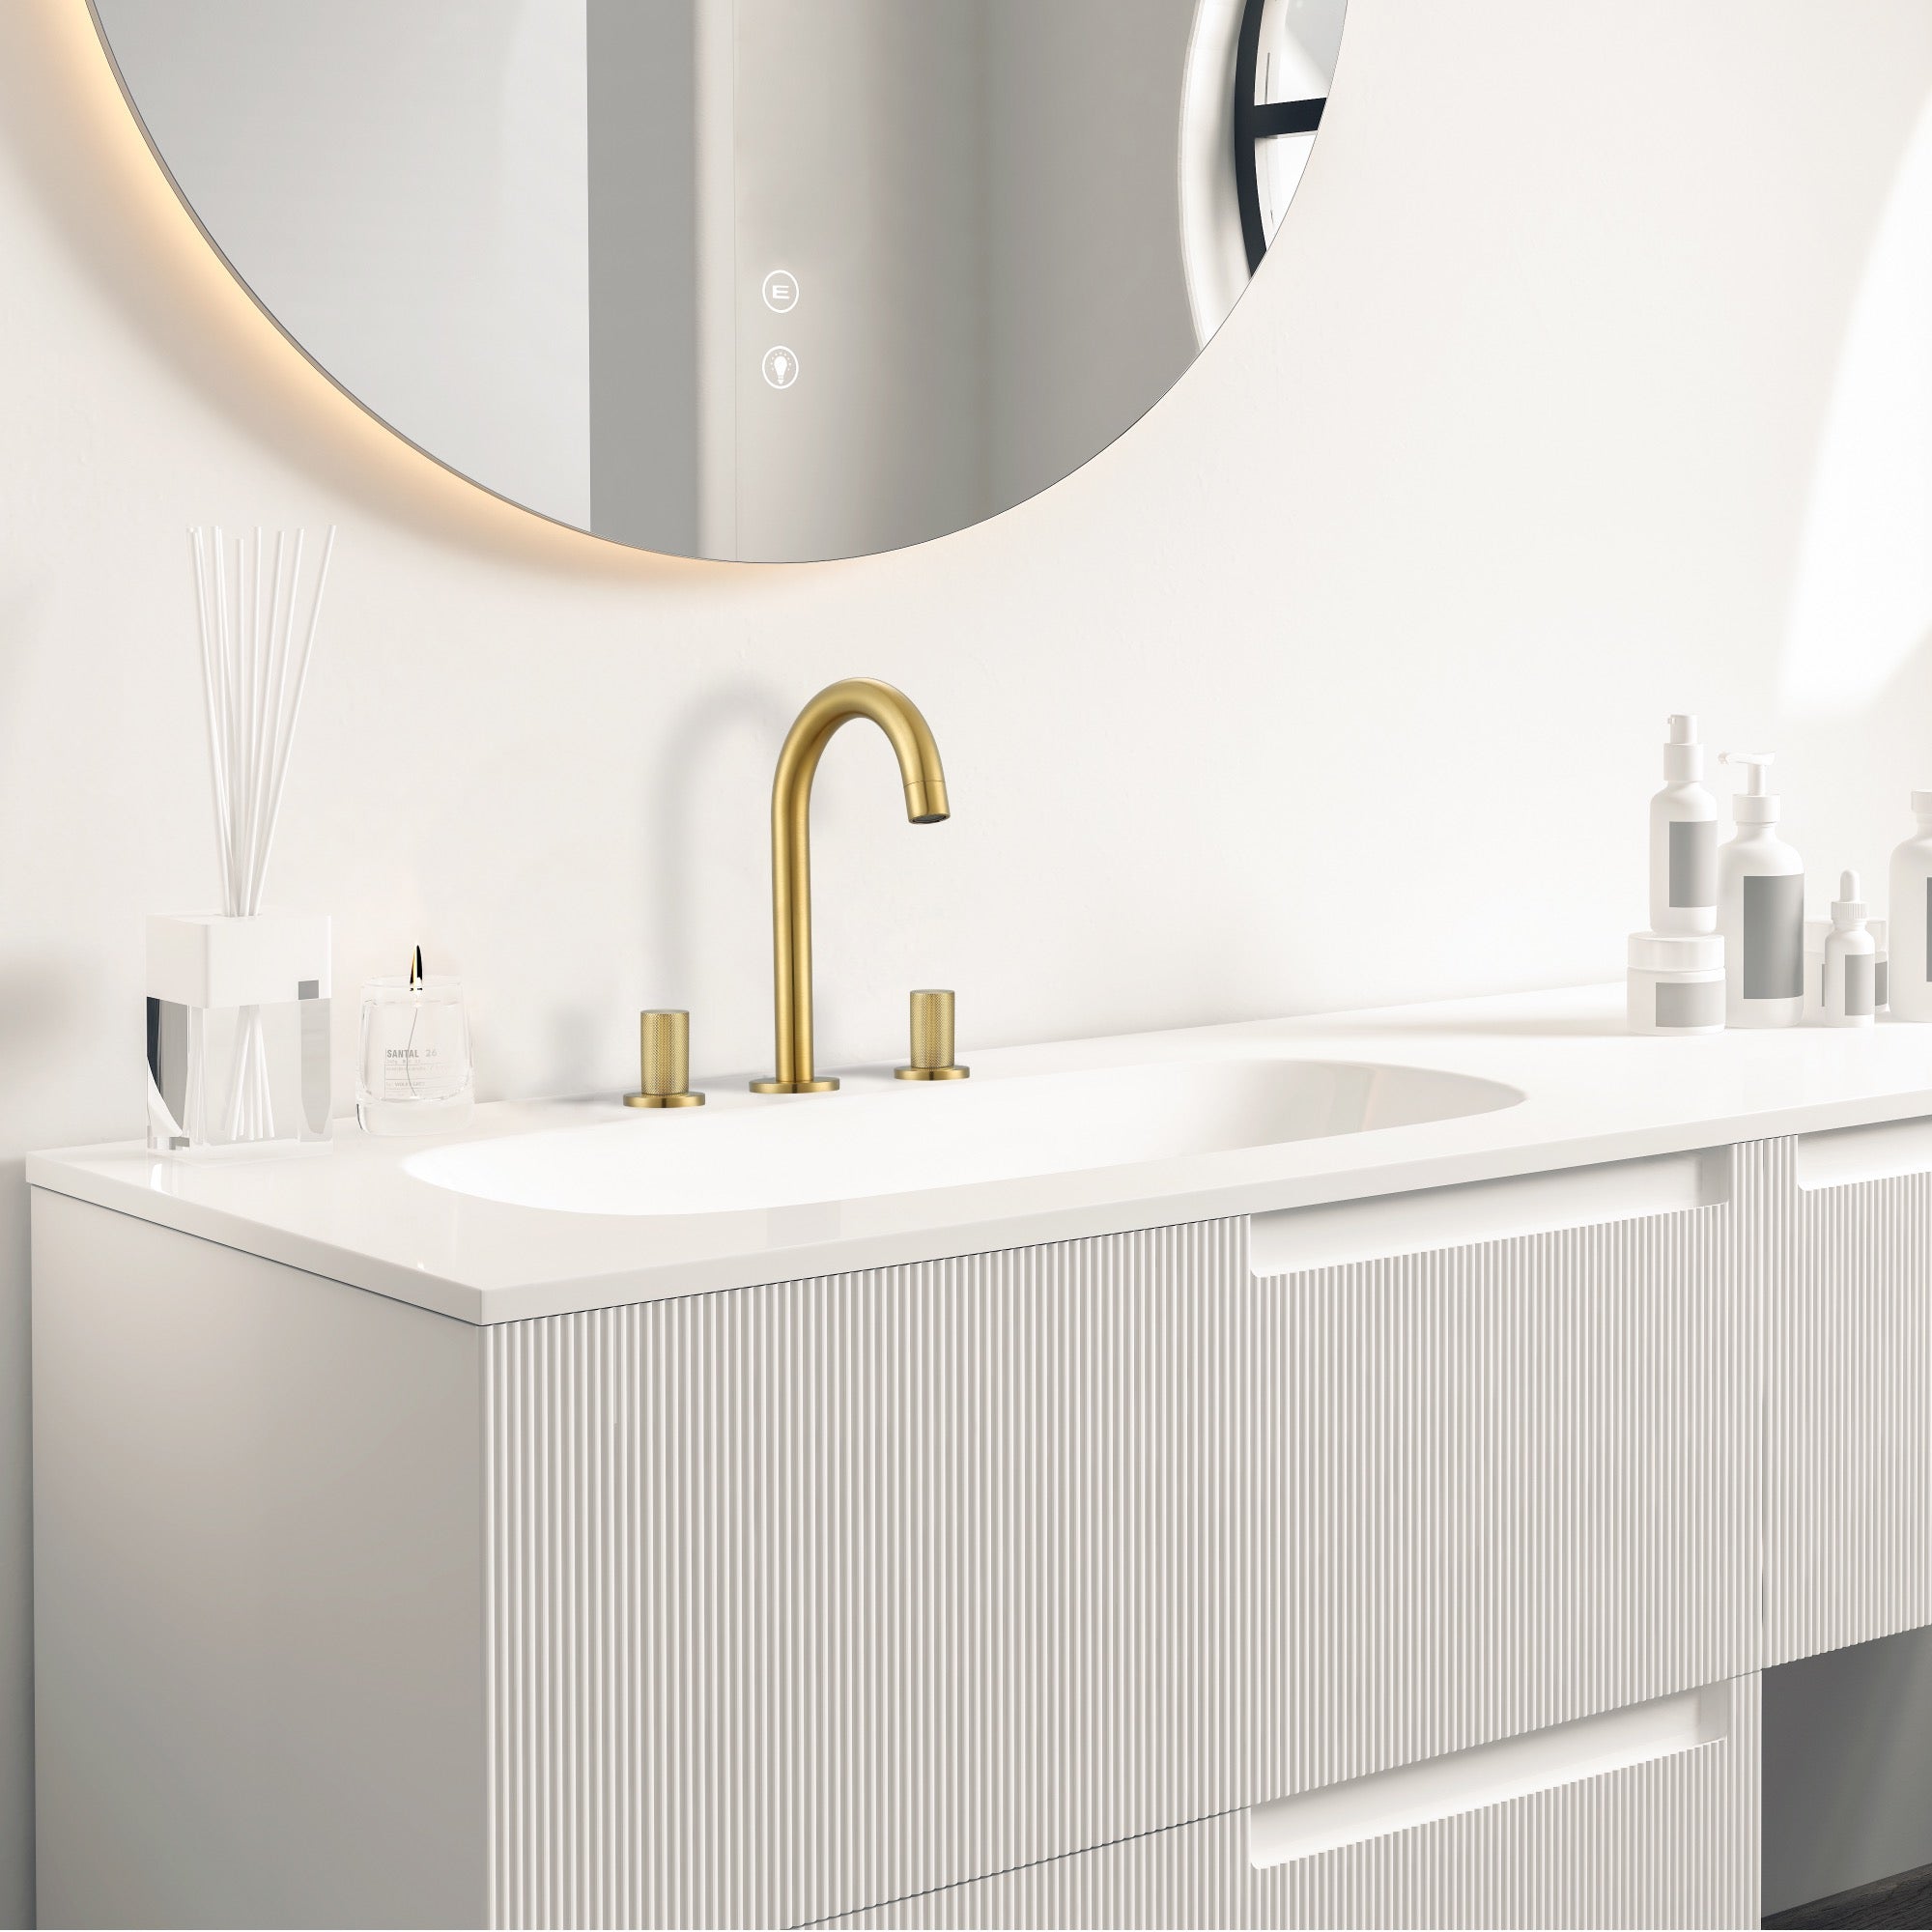 Ancona Industria Series Widespread Bathroom Faucet in Brushed Gold